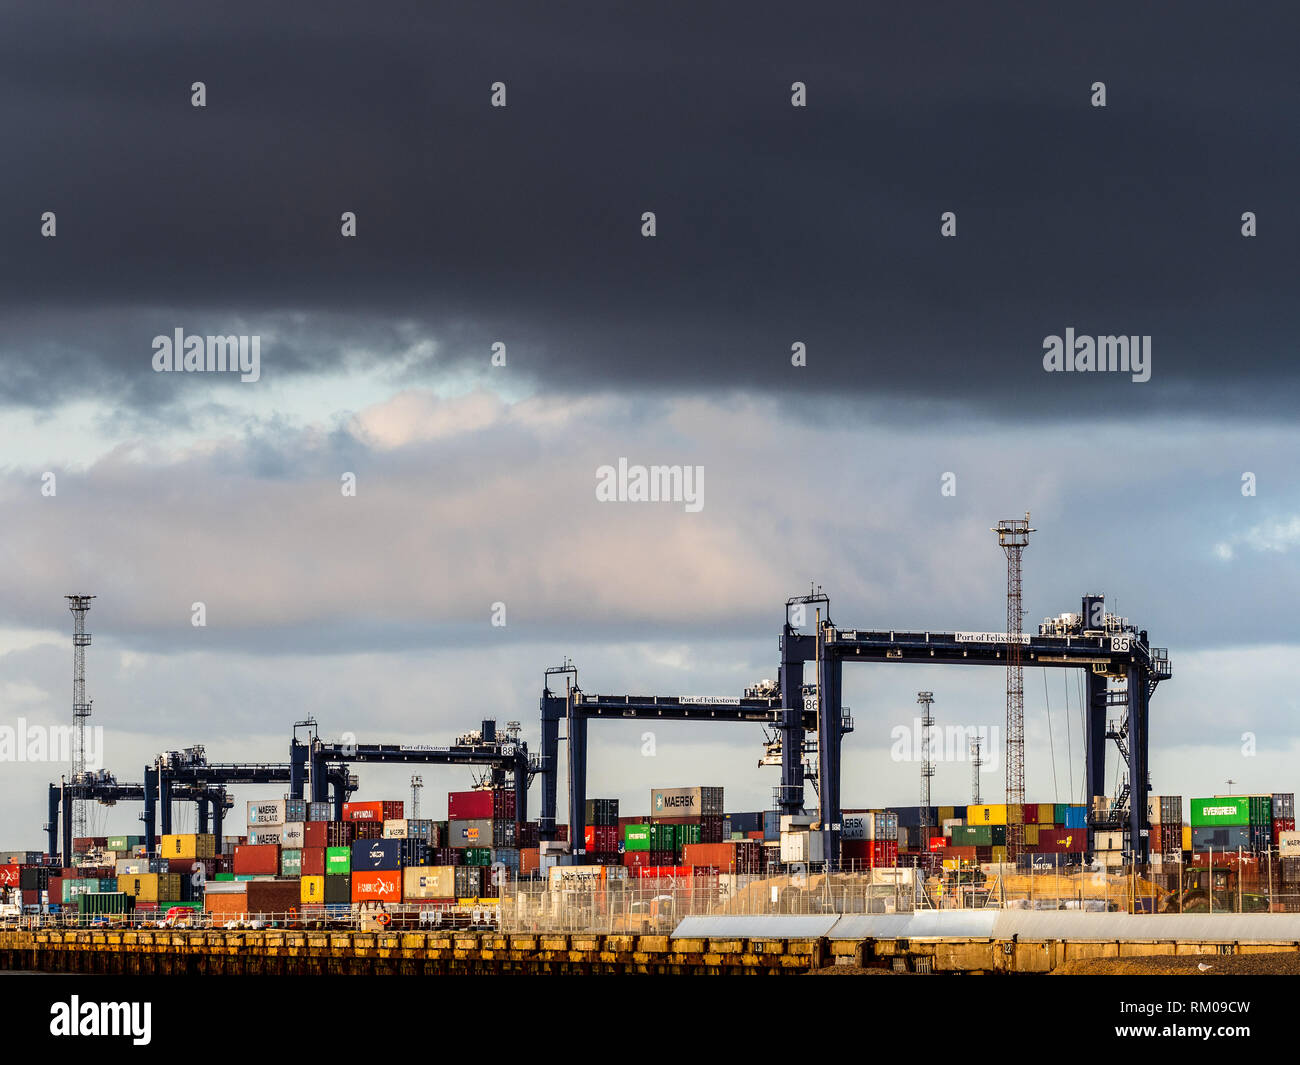 International Trade - containers being loaded and unloaded onto container ships at Felixstowe, the UK's main container port for imports and exports Stock Photo